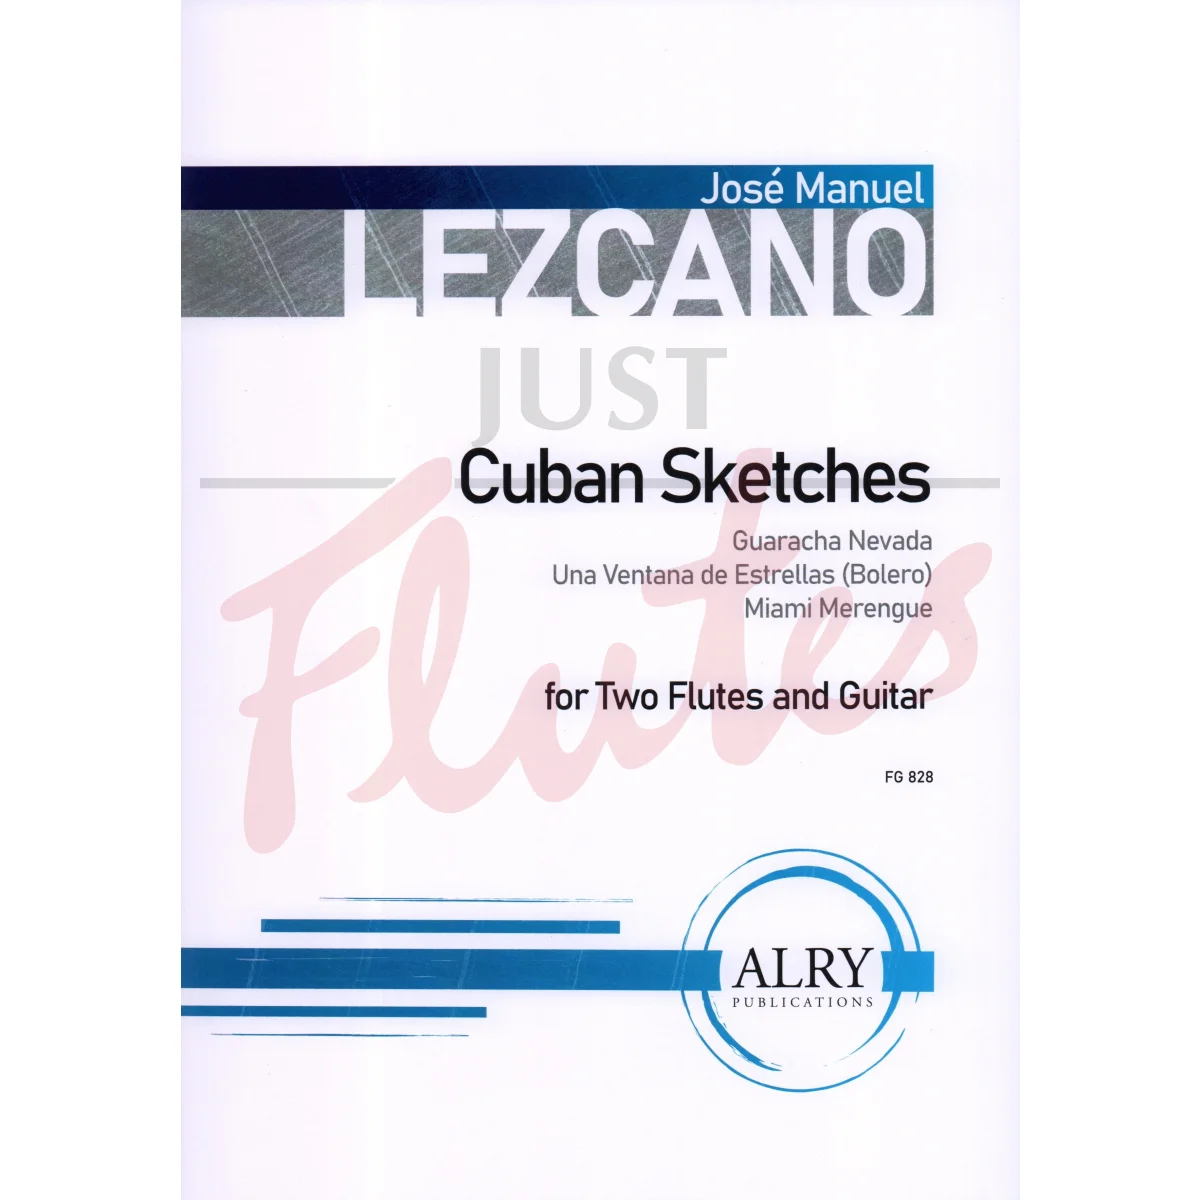 Cuban Sketches for Two Flutes and Guitar